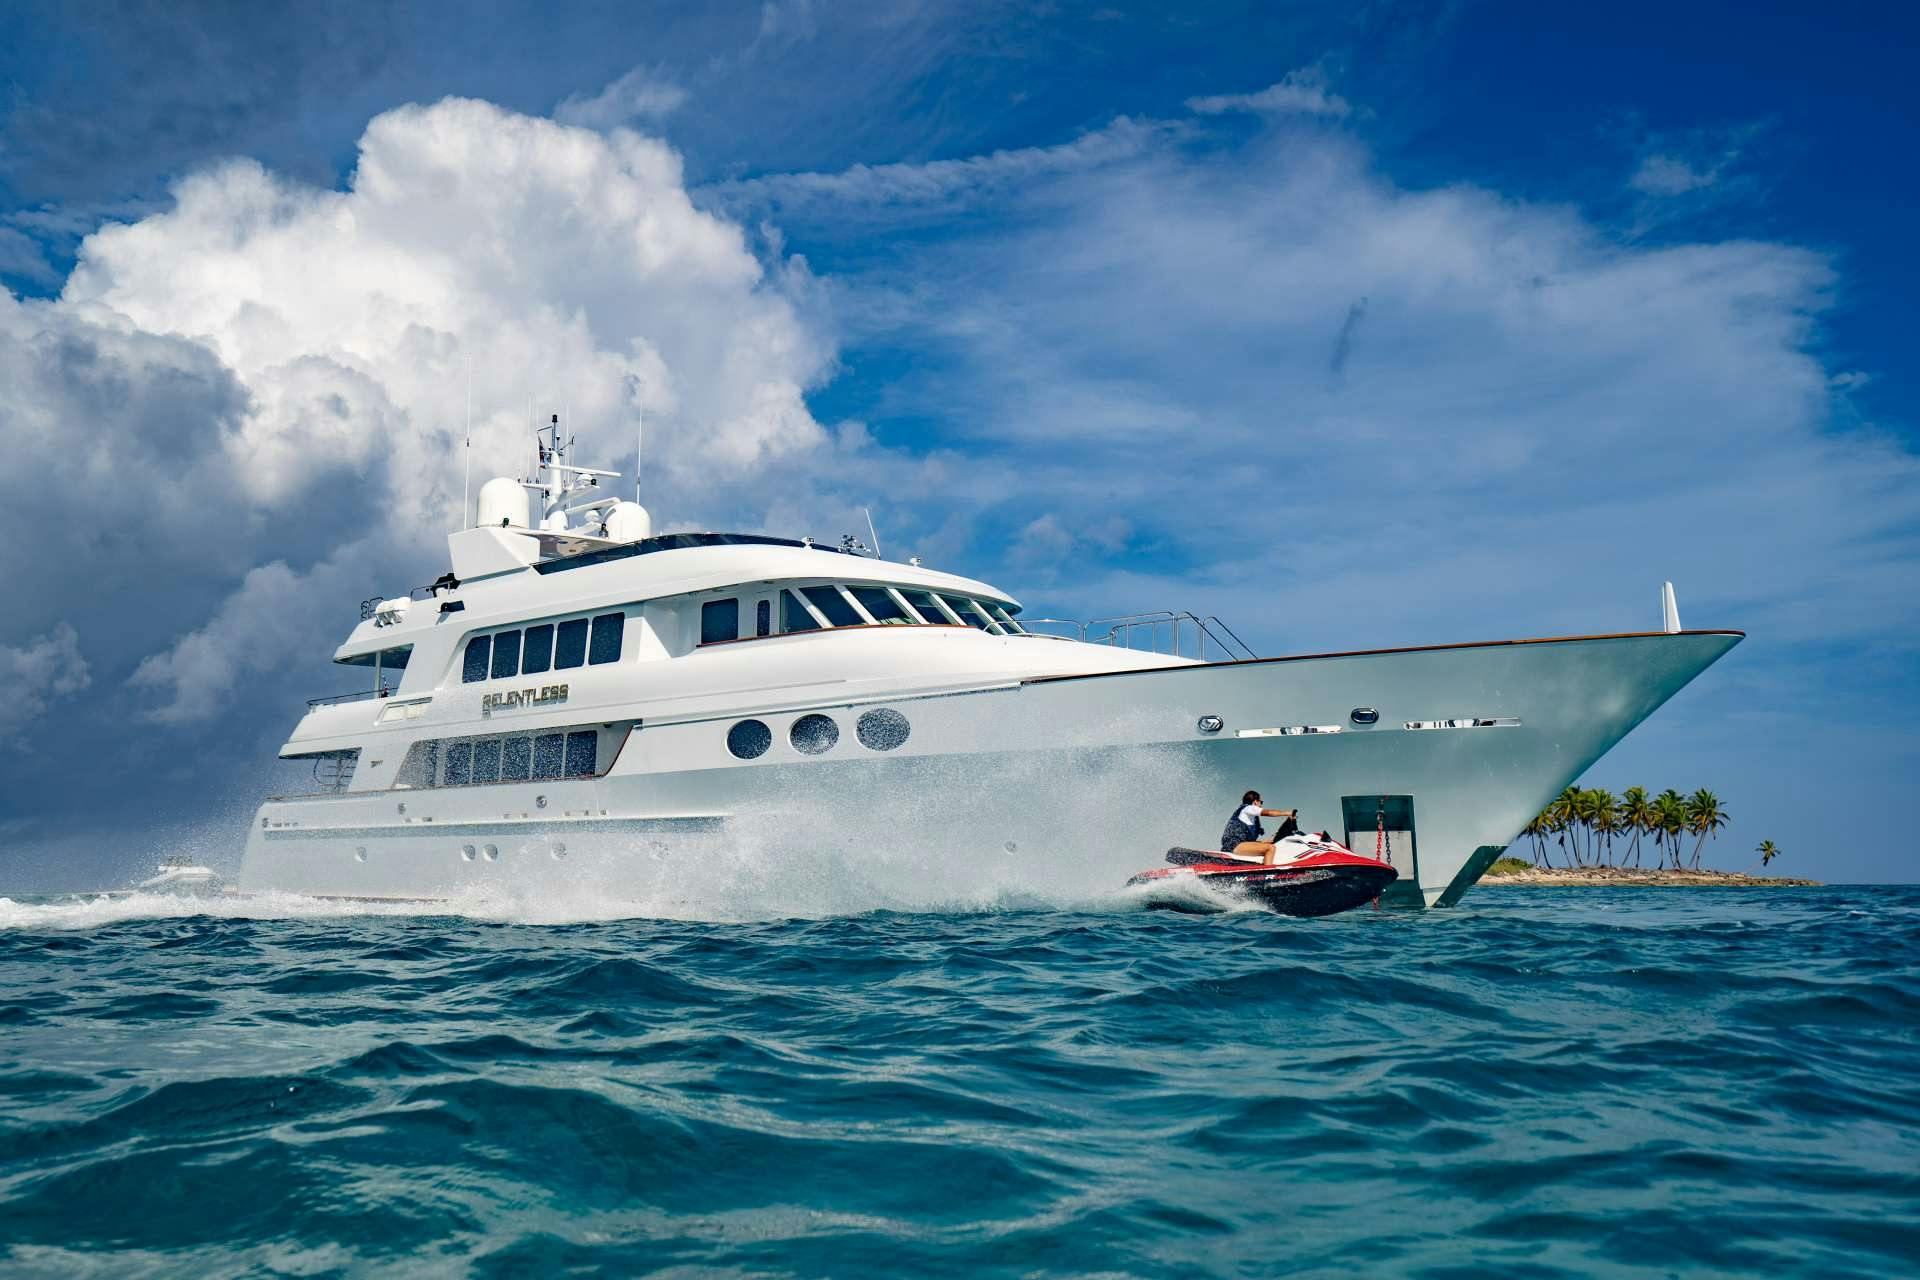 relentless - Yacht Charter Antigua and Barbuda & Boat hire in Bahamas & Caribbean 1